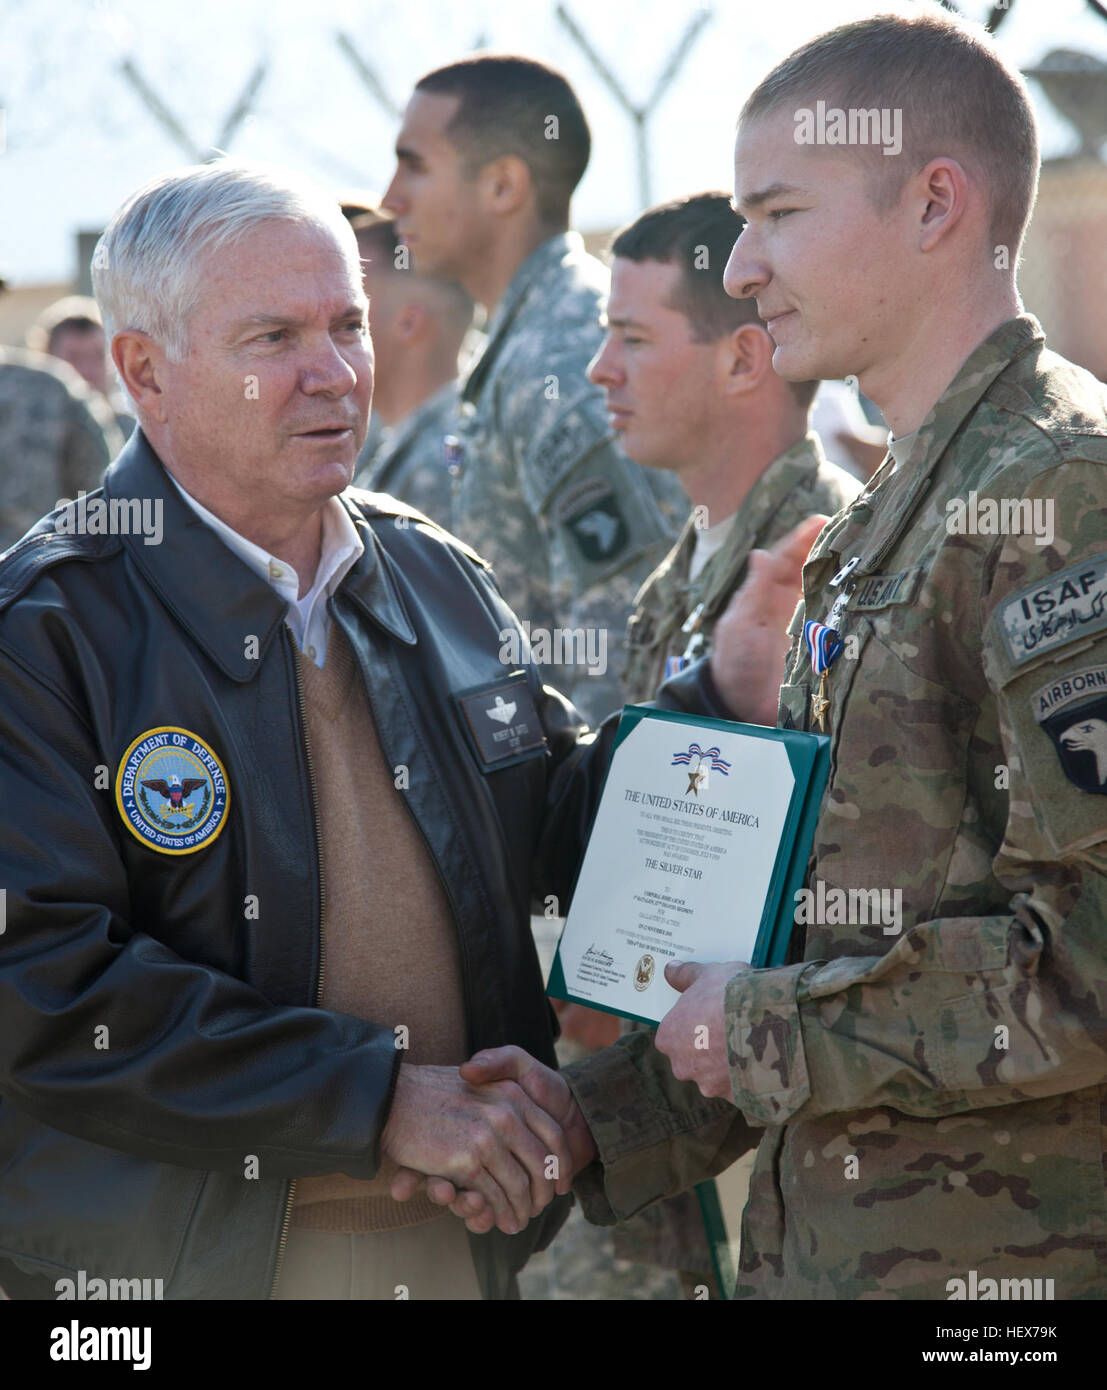 U.S Army Cpl. Joshua Busch, 1st Battalion, 327th Infantry Regiment, is awarded the Silver Star Medal by the Secretary of Defense, the Honorable Robert Gates, Forward Operating Base Joyce, Konar province, Afghanistan, Dec. 7, 2010.  The Silver Star was awarded for valorous actions against armed and heavily fortified enemy during Operation Strong Eagle. (Photo by: Spc. Andy Barrera) Flickr - DVIDSHUB - Soldiers Bestowed Medals by Secretary of Defense (Image 3 of 7) Stock Photo